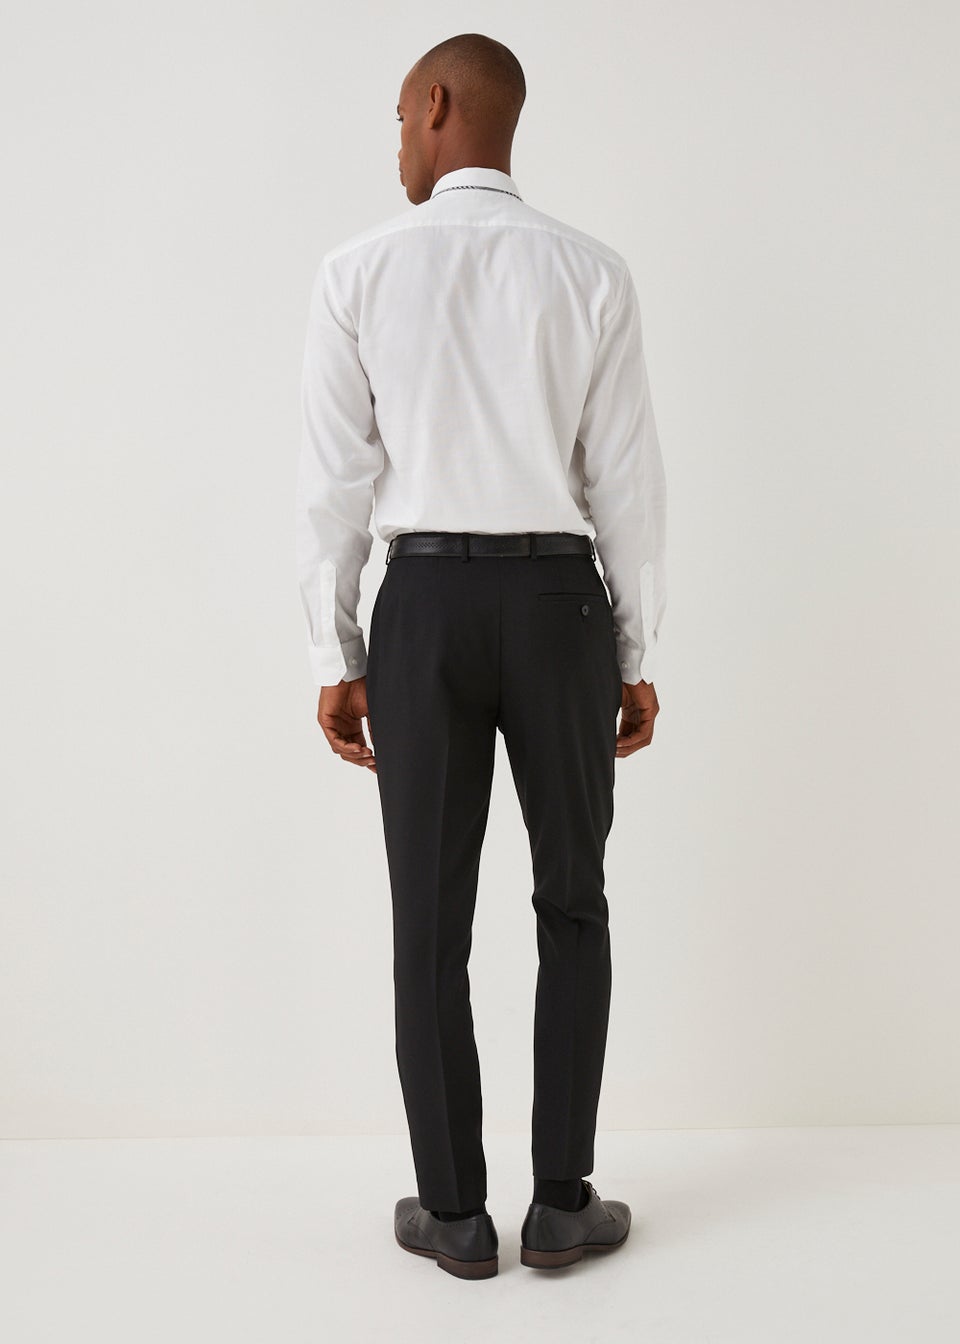 Taylor & Wright Panama Black Skinny Fit Suit Trousers